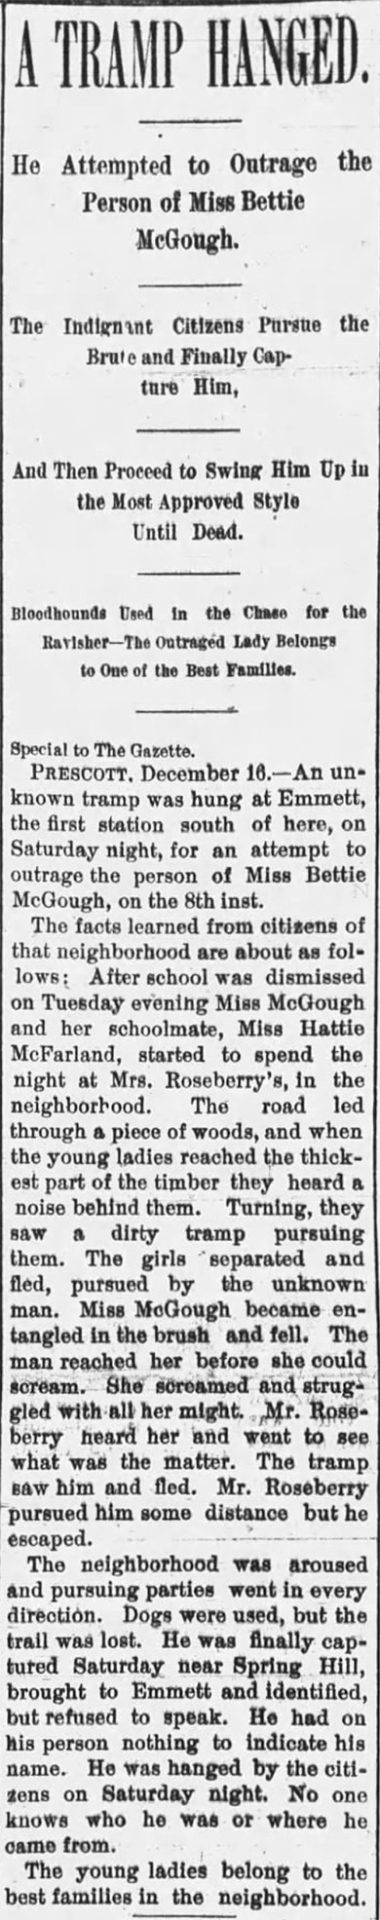 "A Tramp Hanged" newspaper clipping